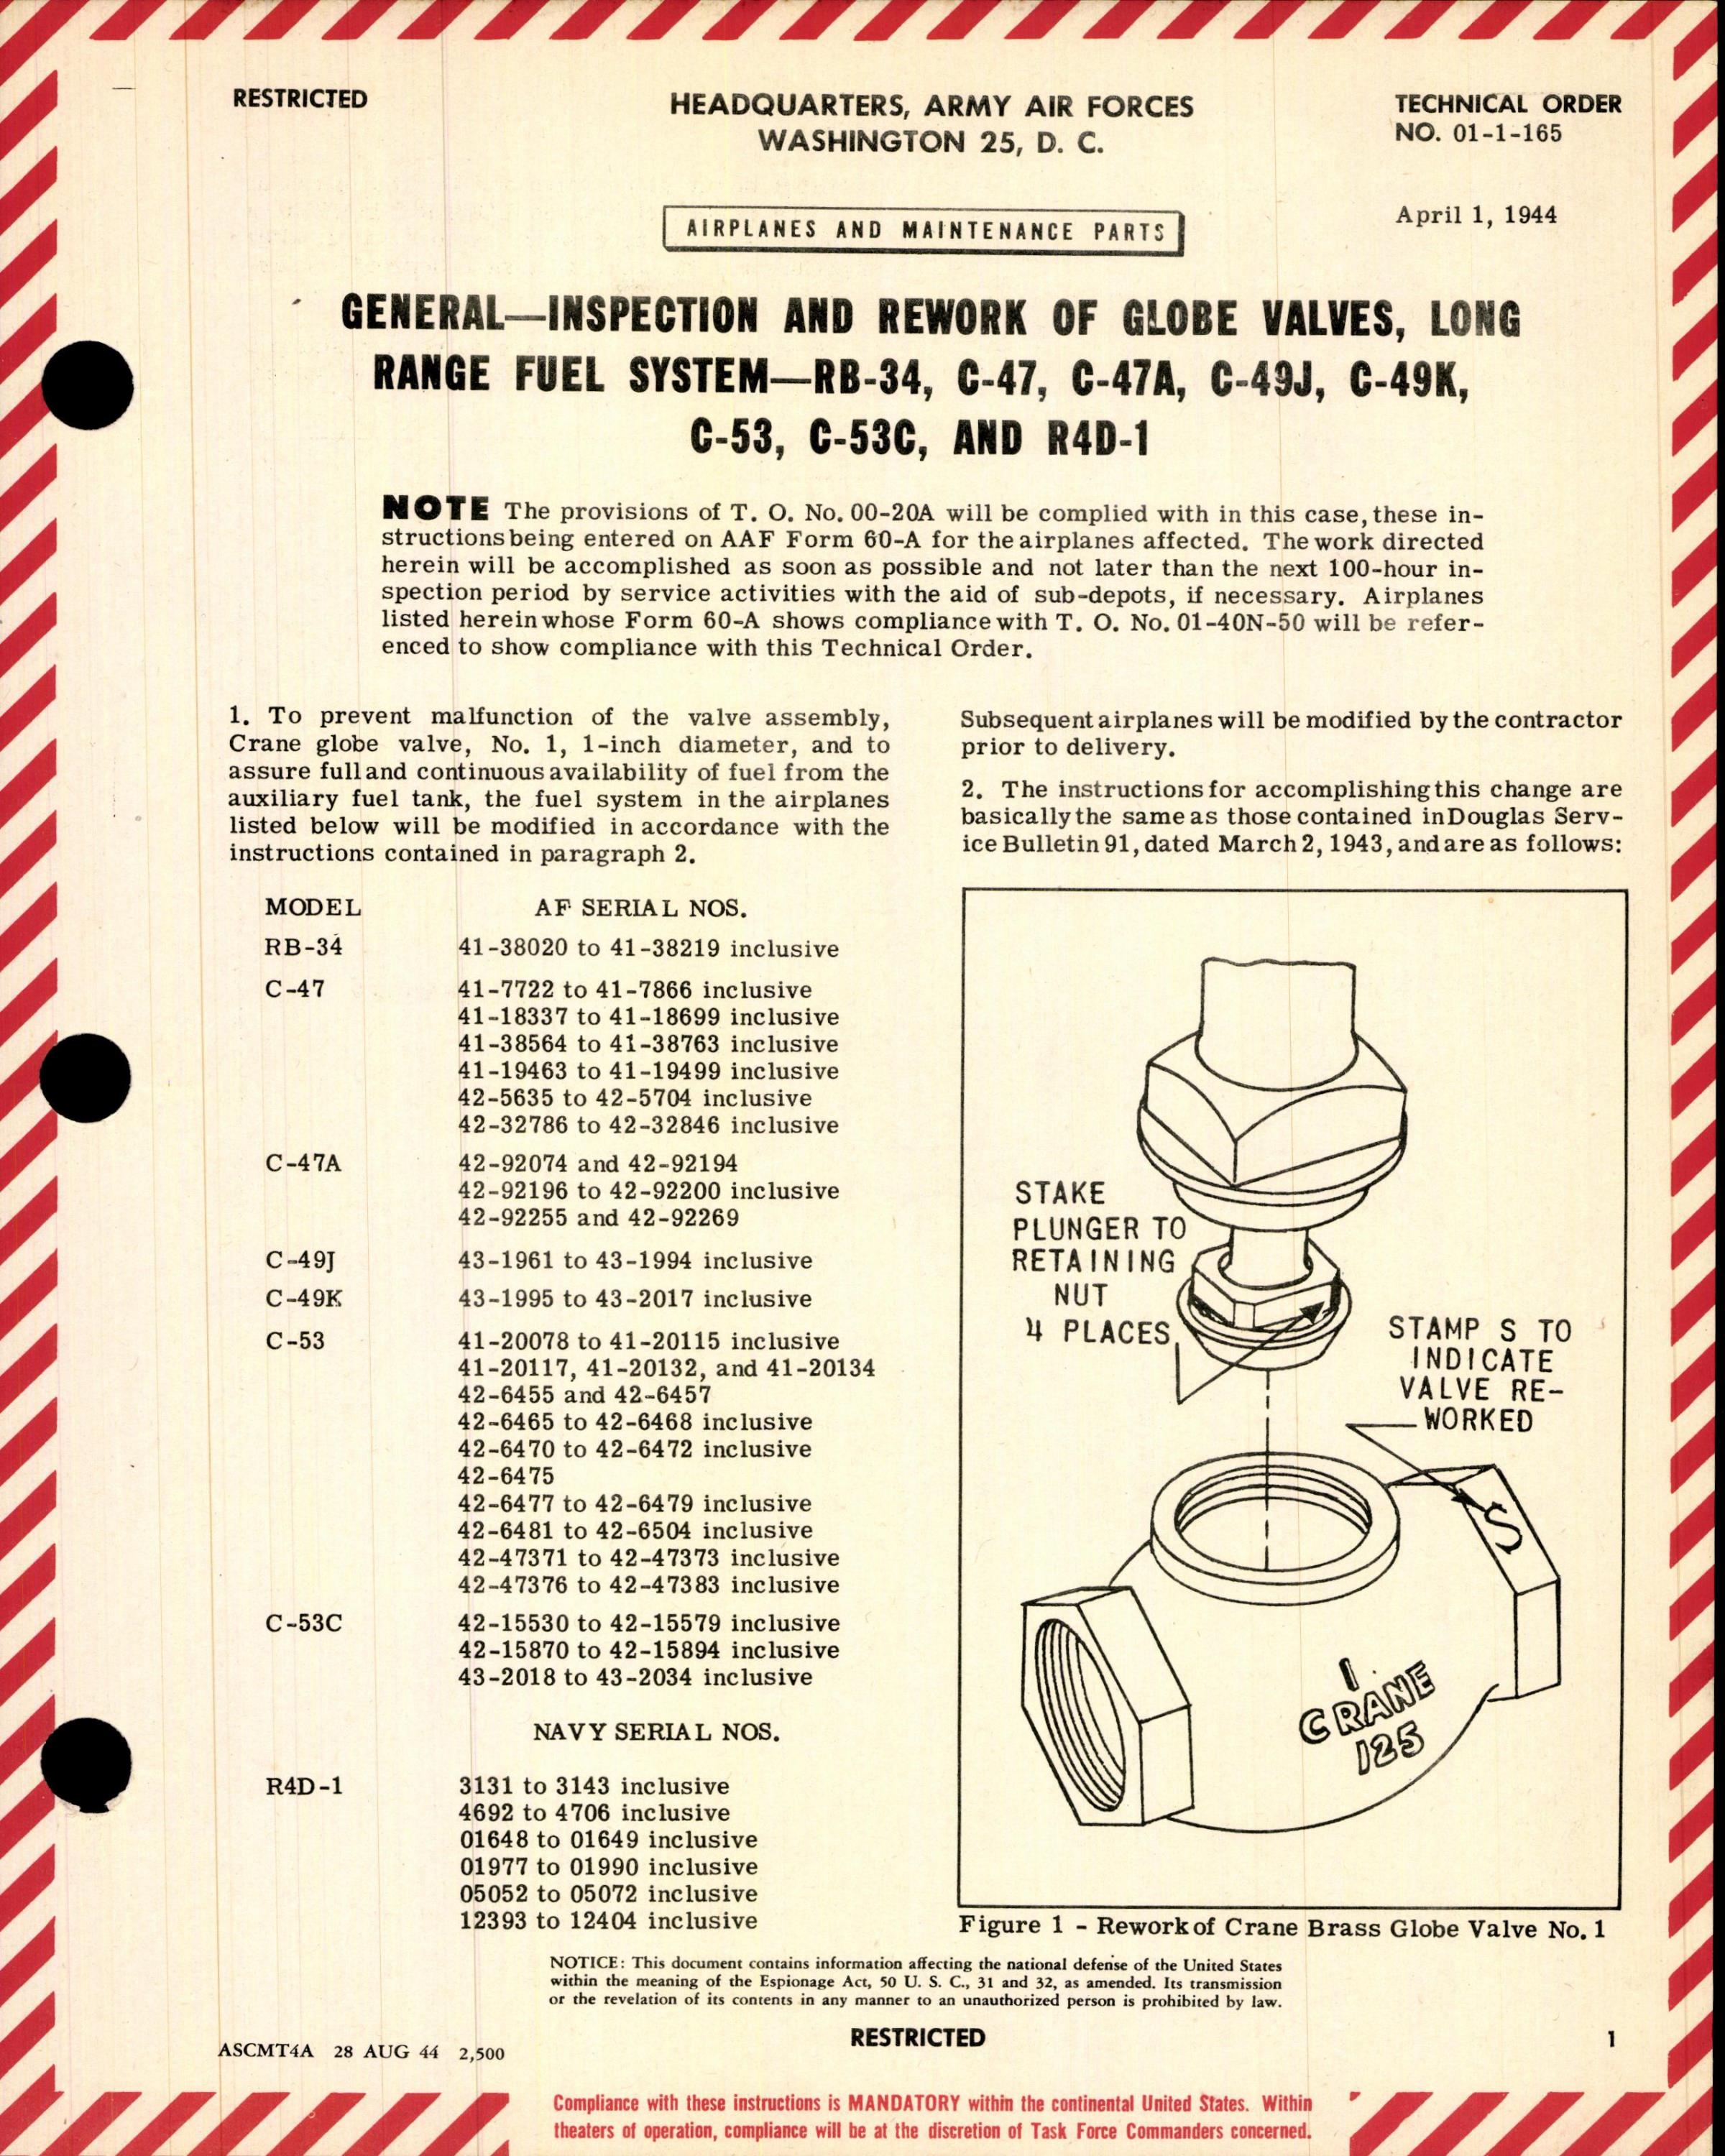 Sample page 1 from AirCorps Library document: Inspection and Rework of Globe Valves in Long Range Fuel System